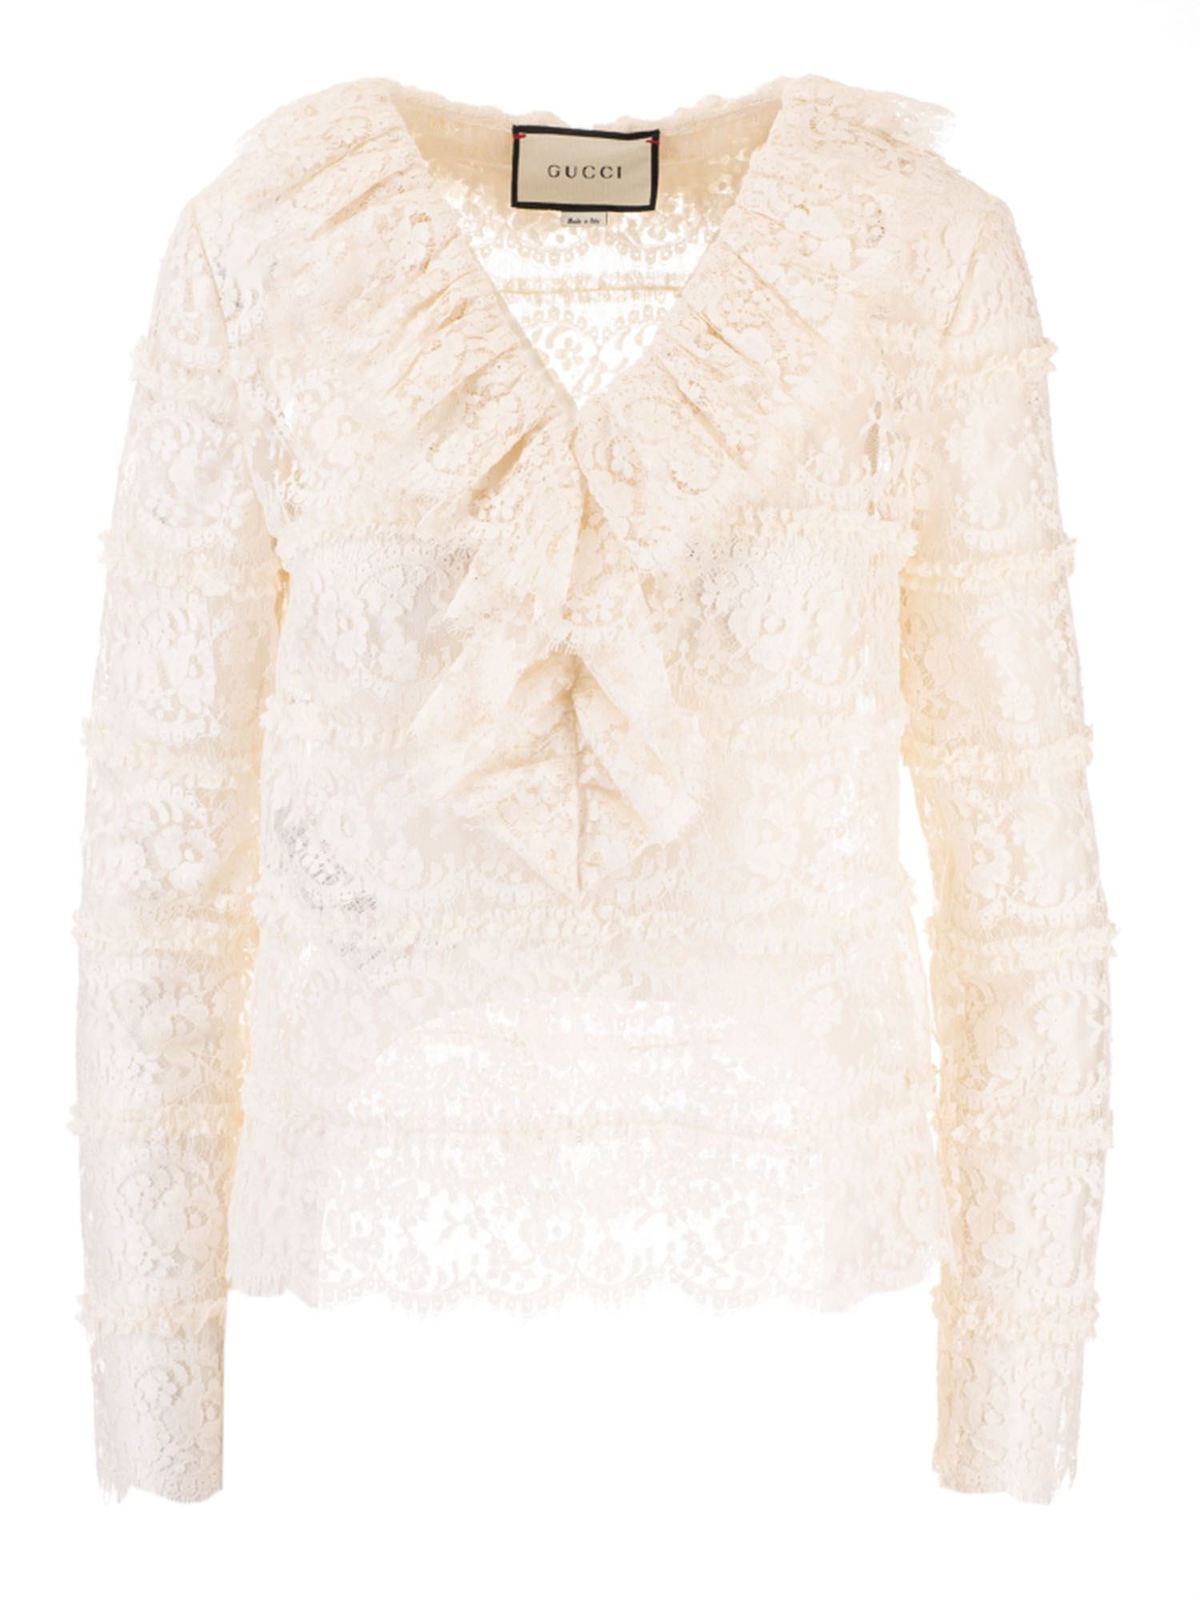 Ruffles lace shirt in ivory color 